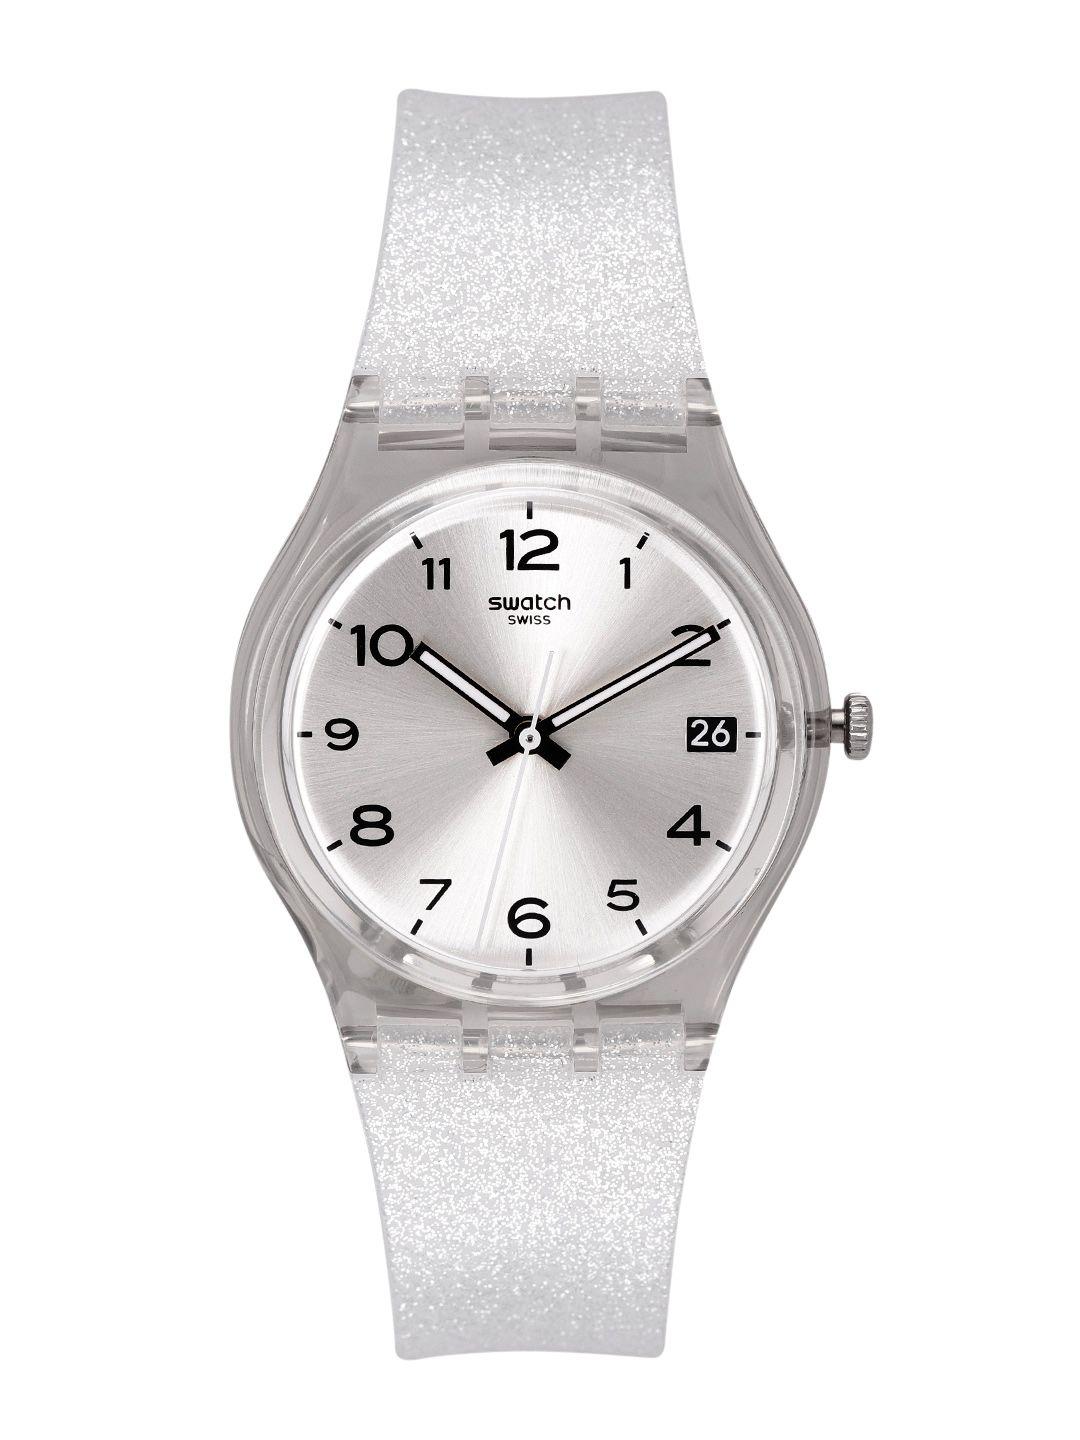 swatch newcore unisex silver water resistant analogue watch gm416c